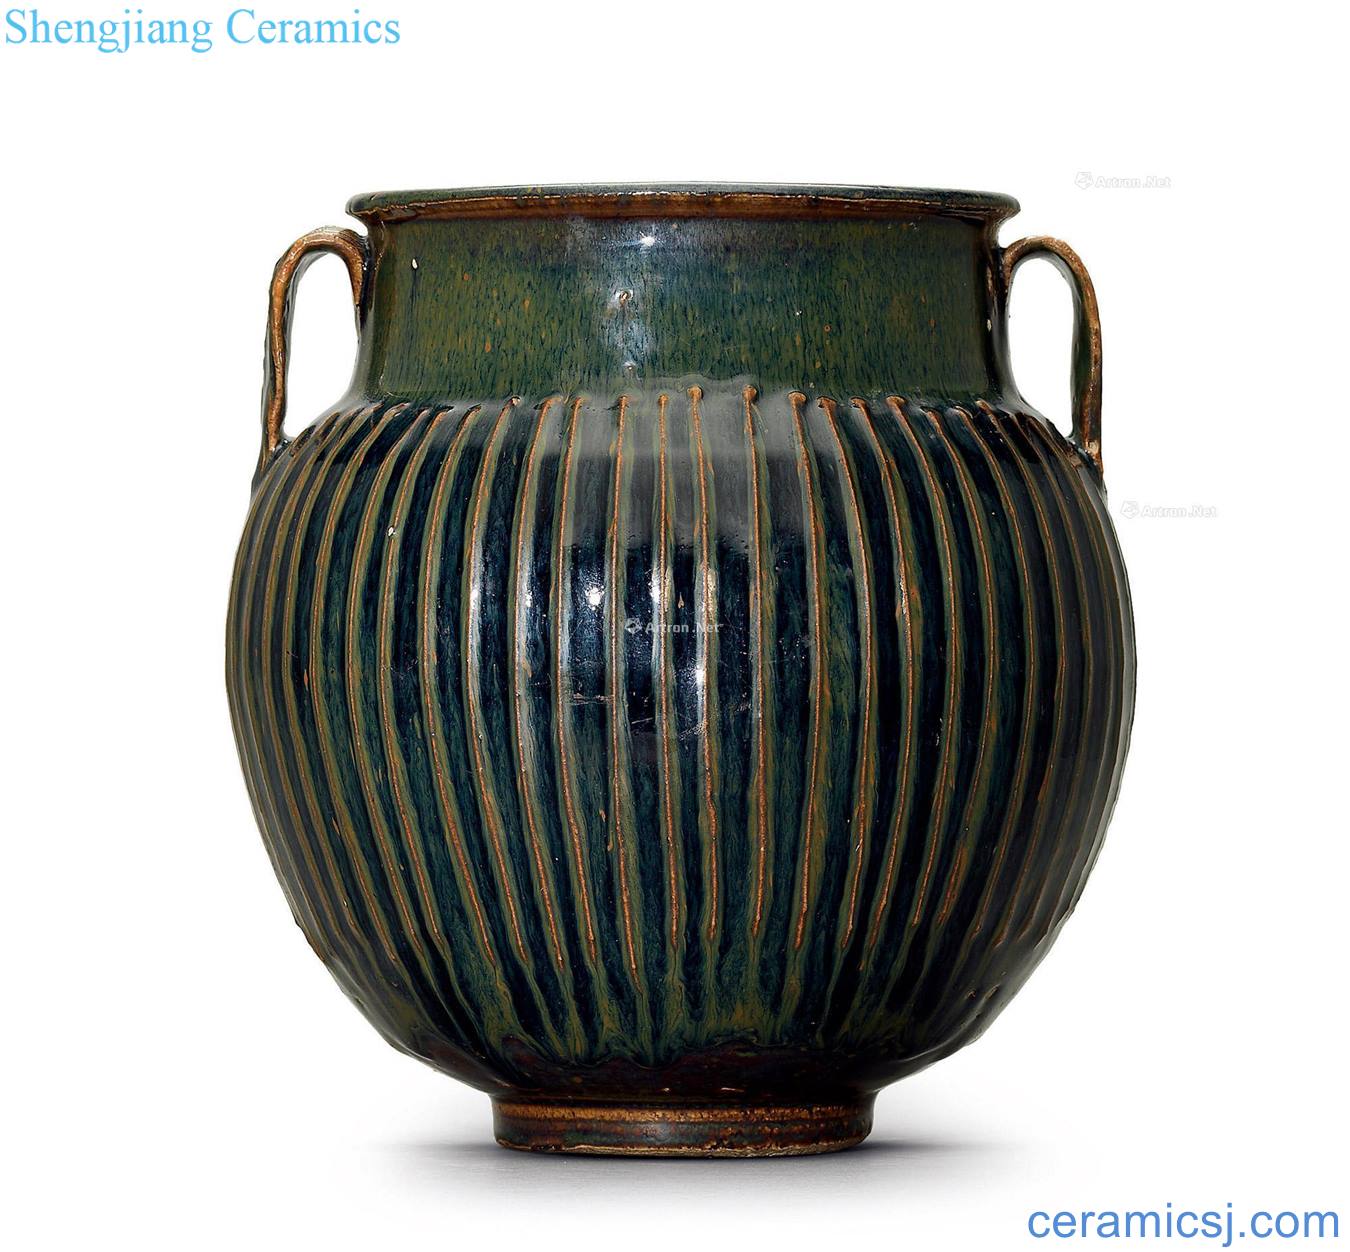 Northern song dynasty/golden brown and black glaze ribbed double tank